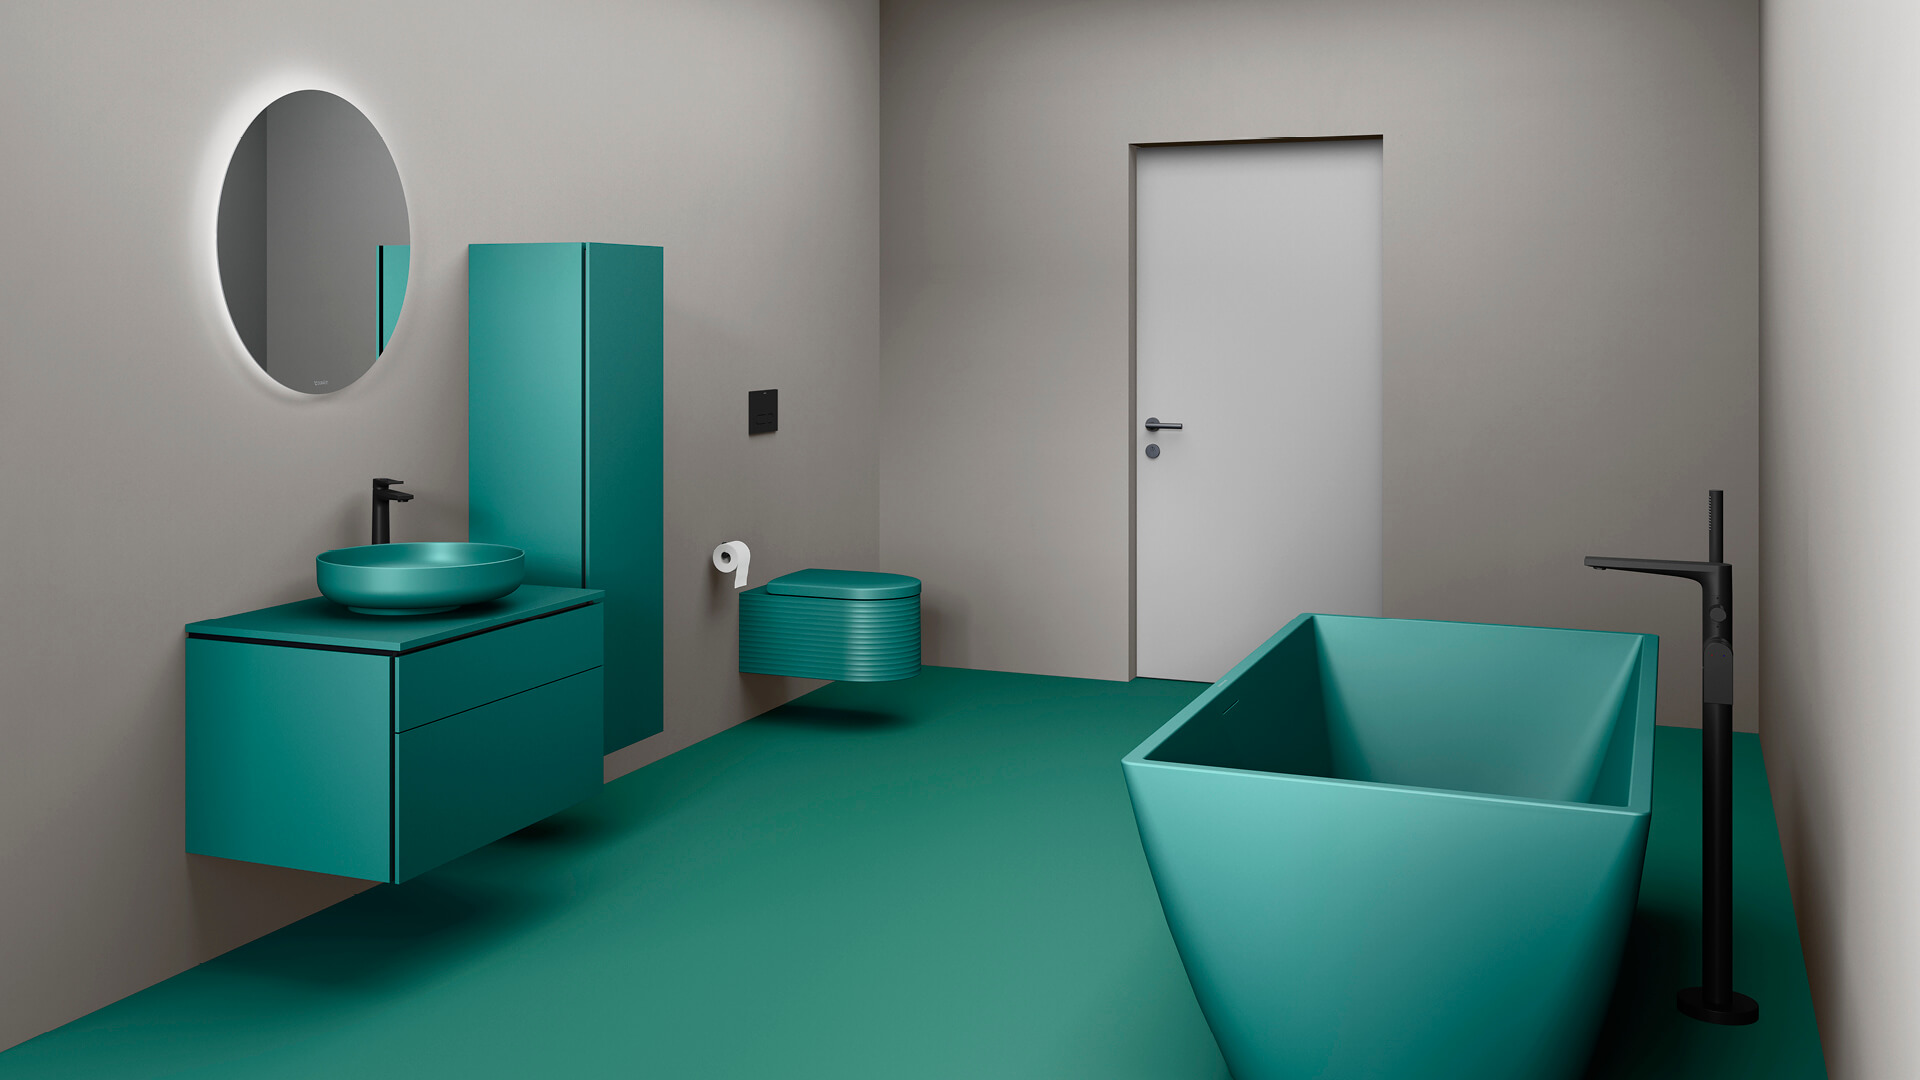 Sleek is the new standard of bathroom design - Architect and Interiors India